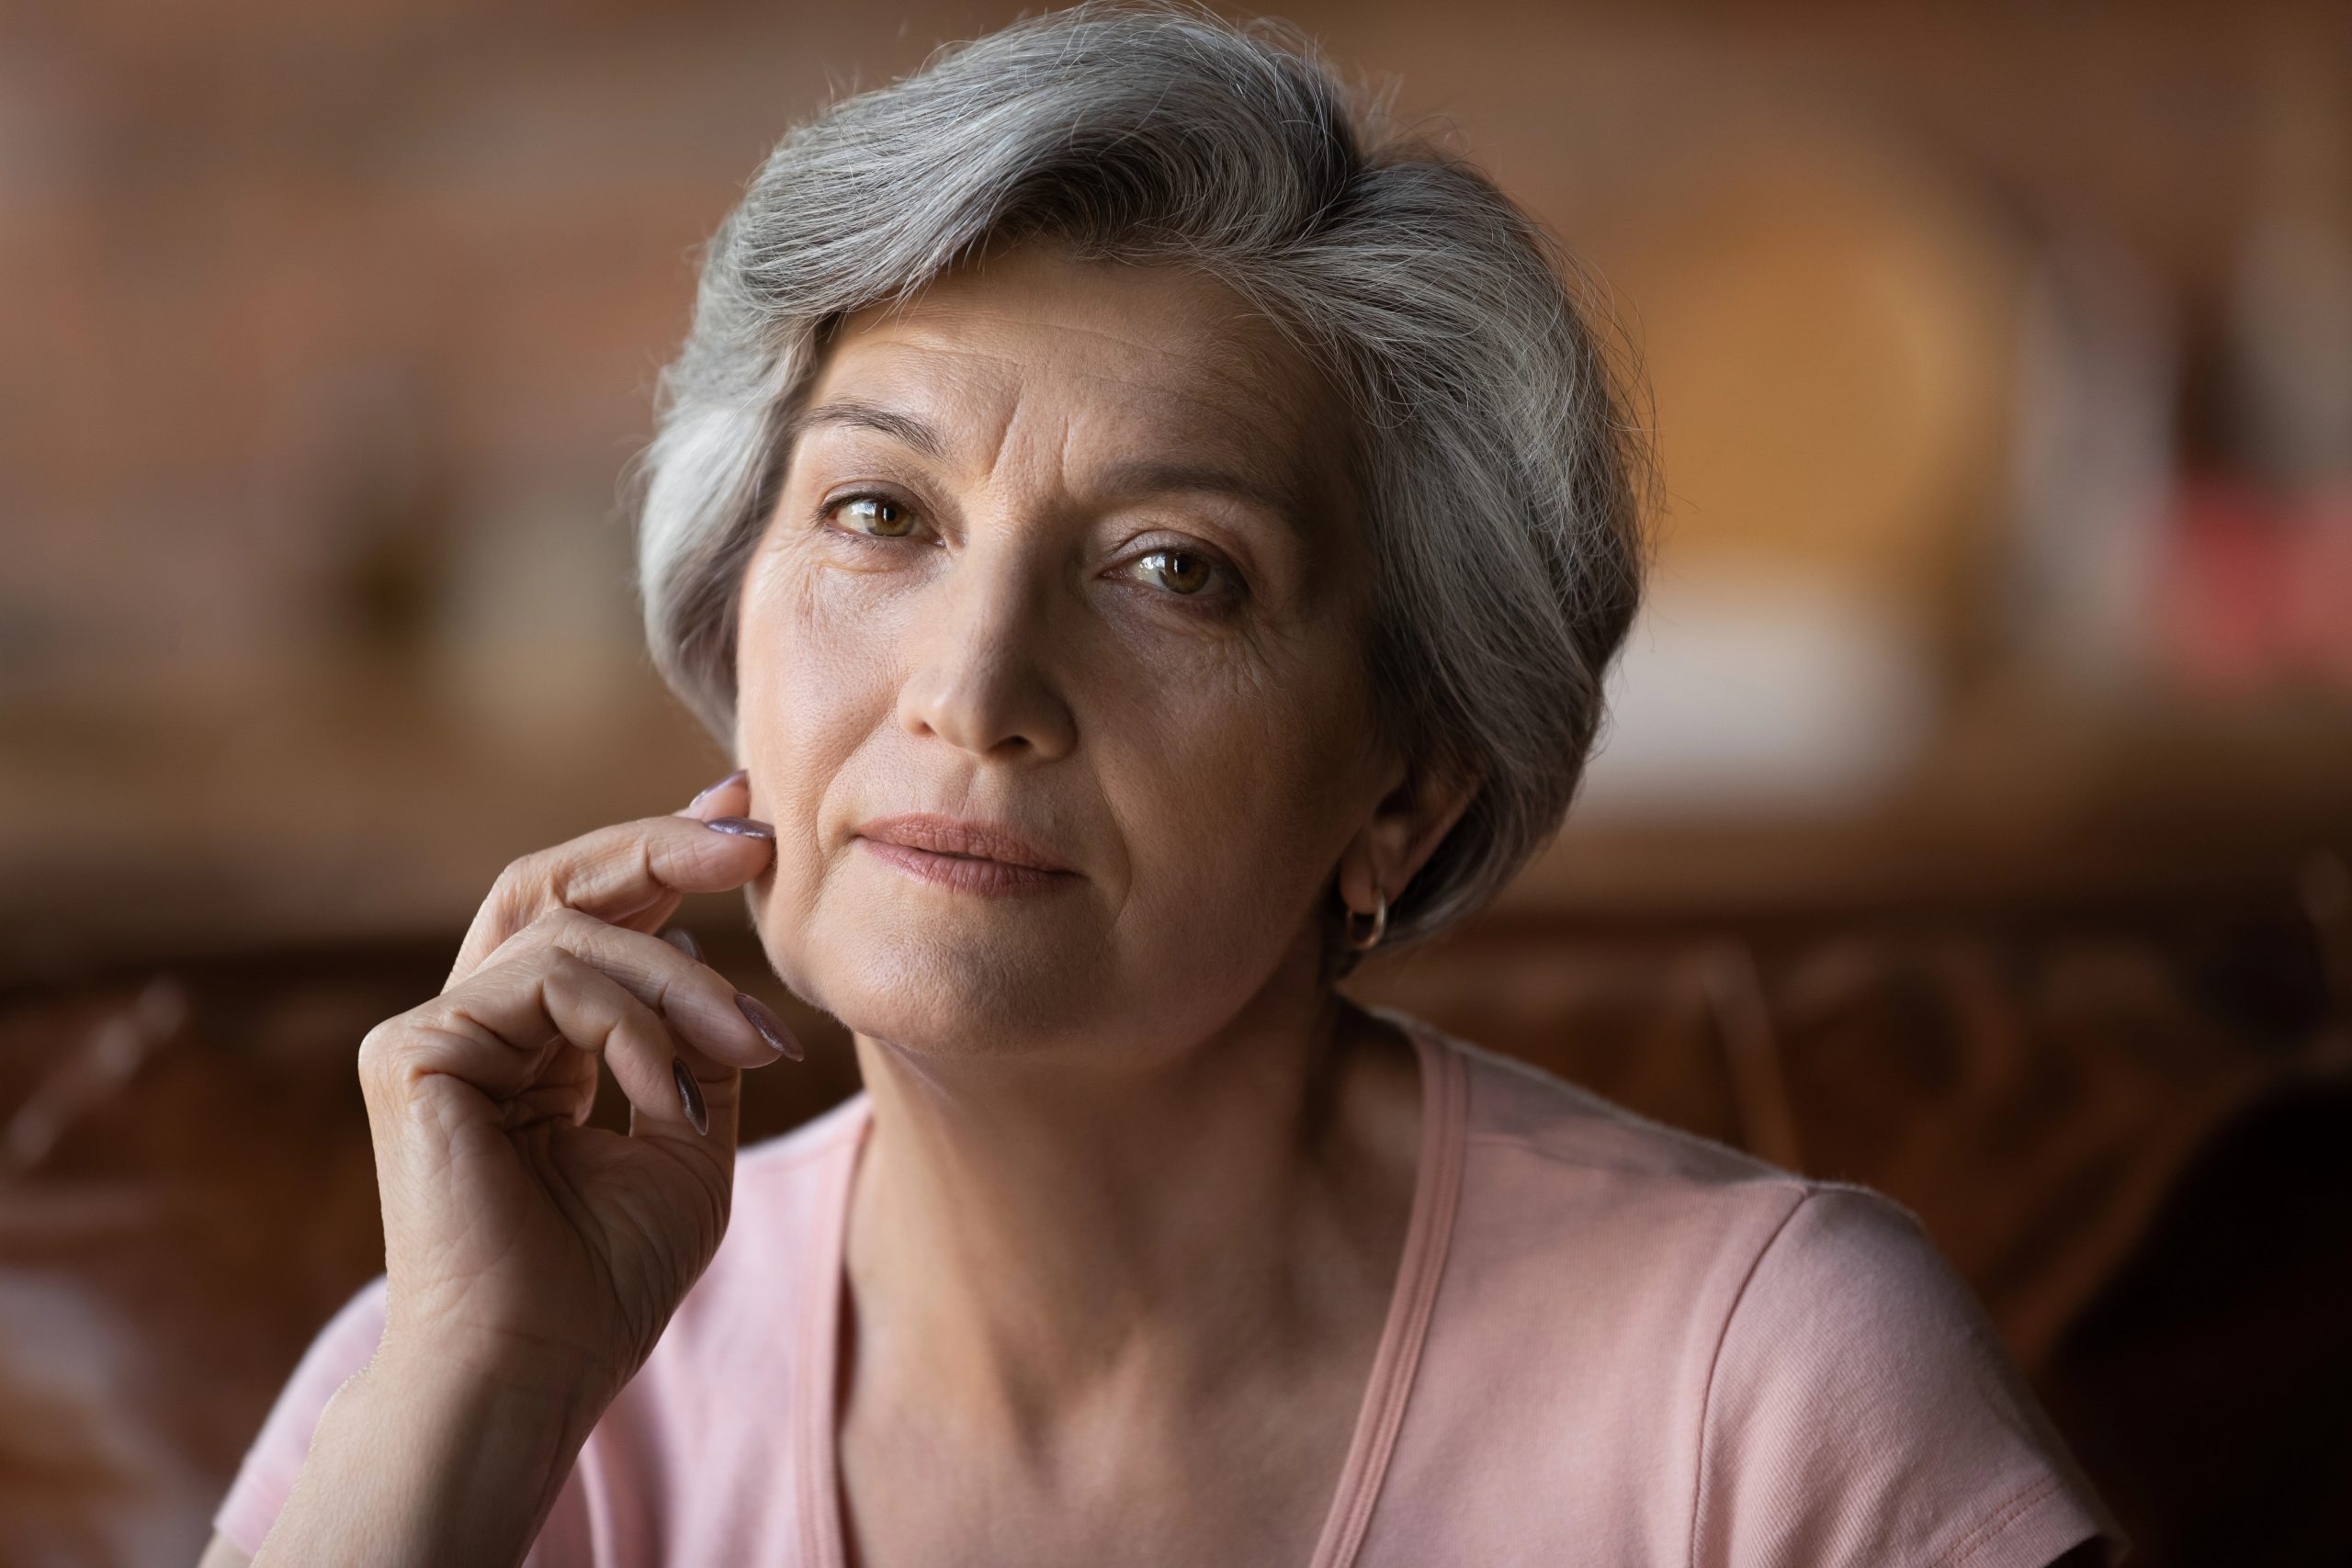 Middle Aged Women in pink shirt looking pensive into the camera.